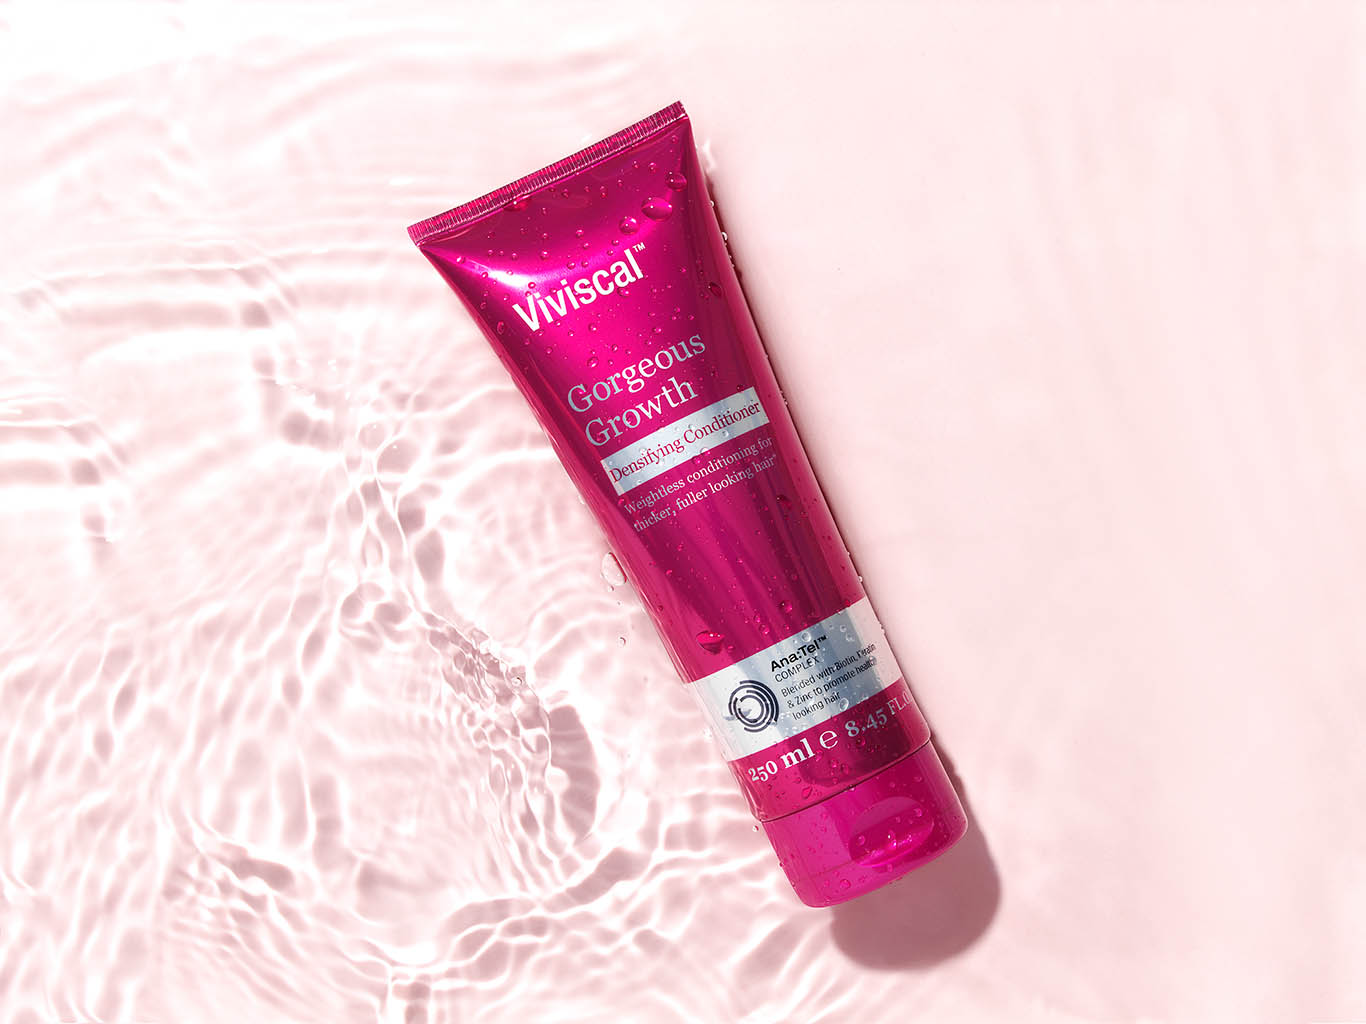 Packshot Factory - Coloured background - Viviscal conditioner tube in water